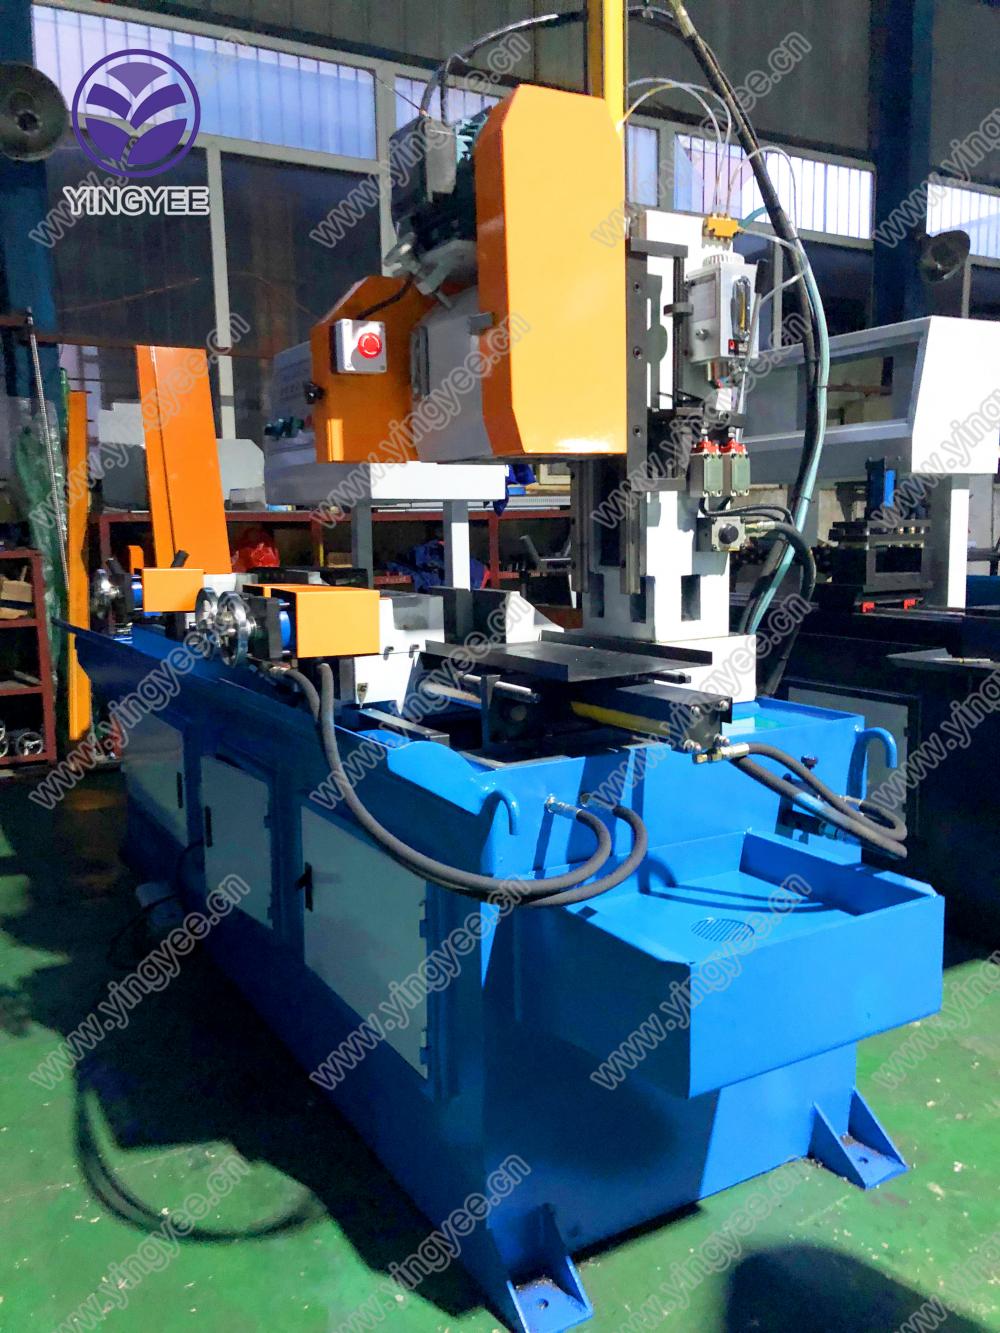 Auto Metal Pipe Cutting Machine From Yingyee004